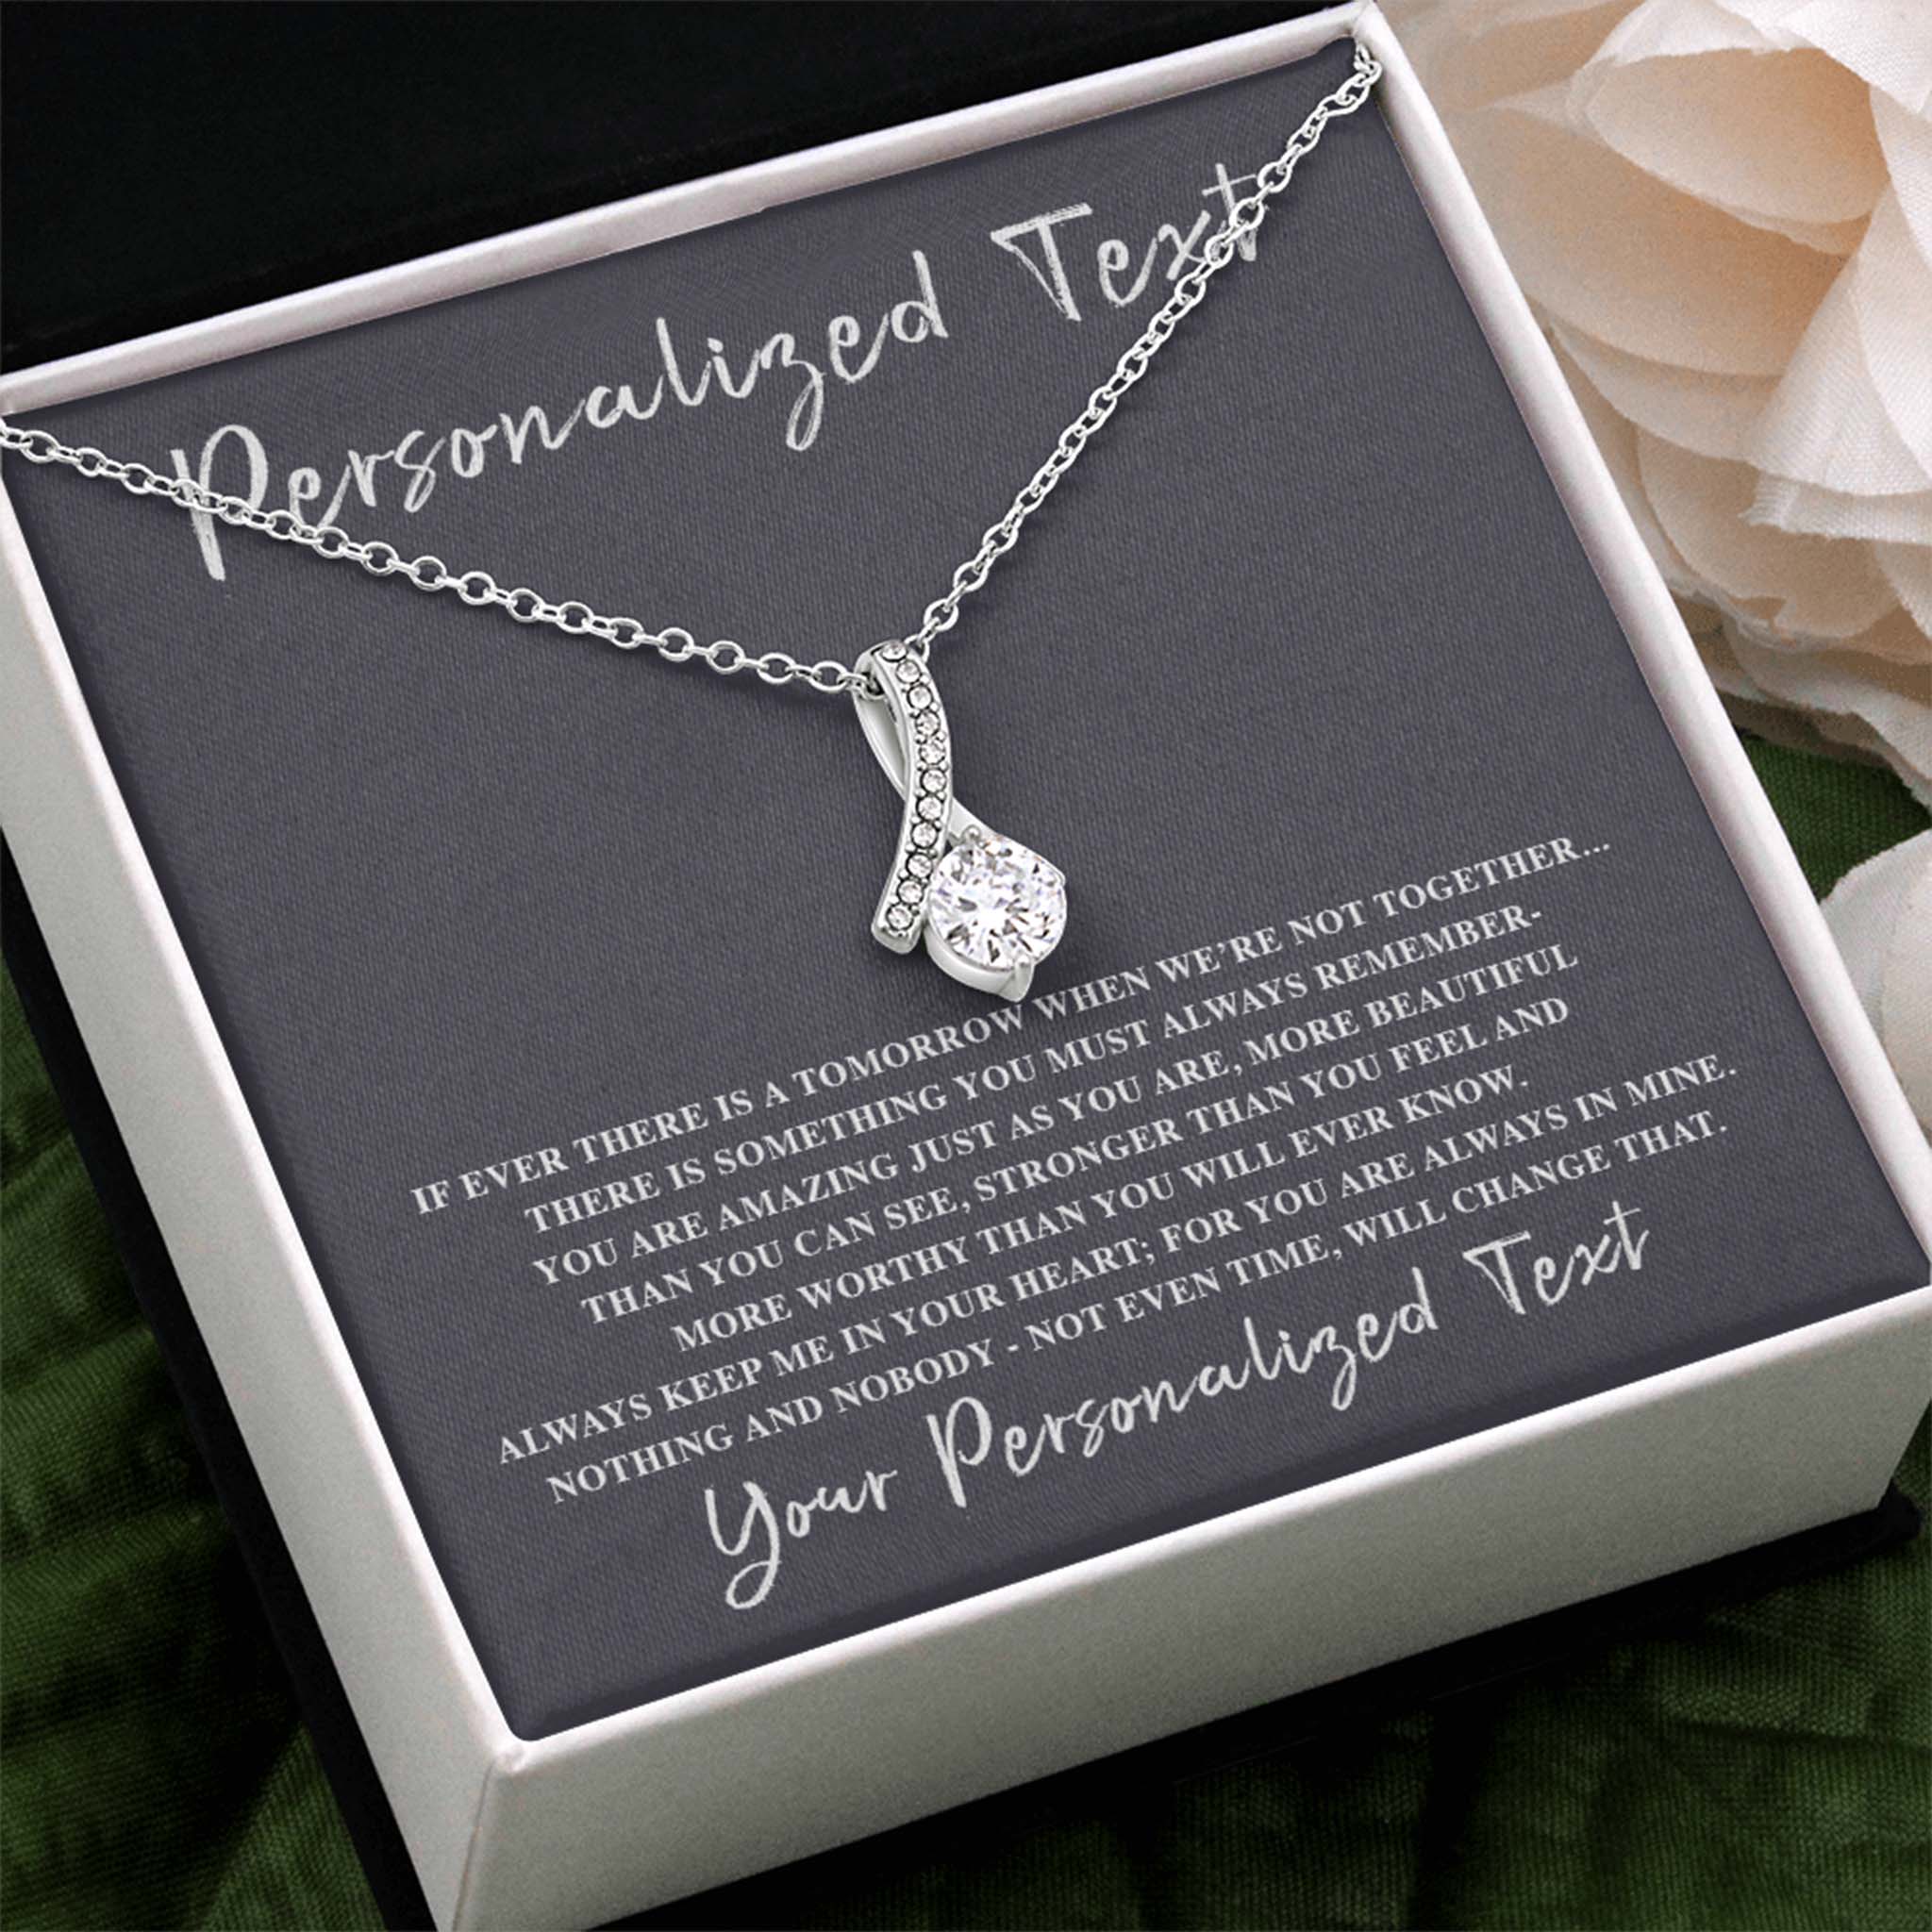 Alluring Beauty Necklace If Ever There Is a Tomorrow Personalized Insert CardCustomly Gifts